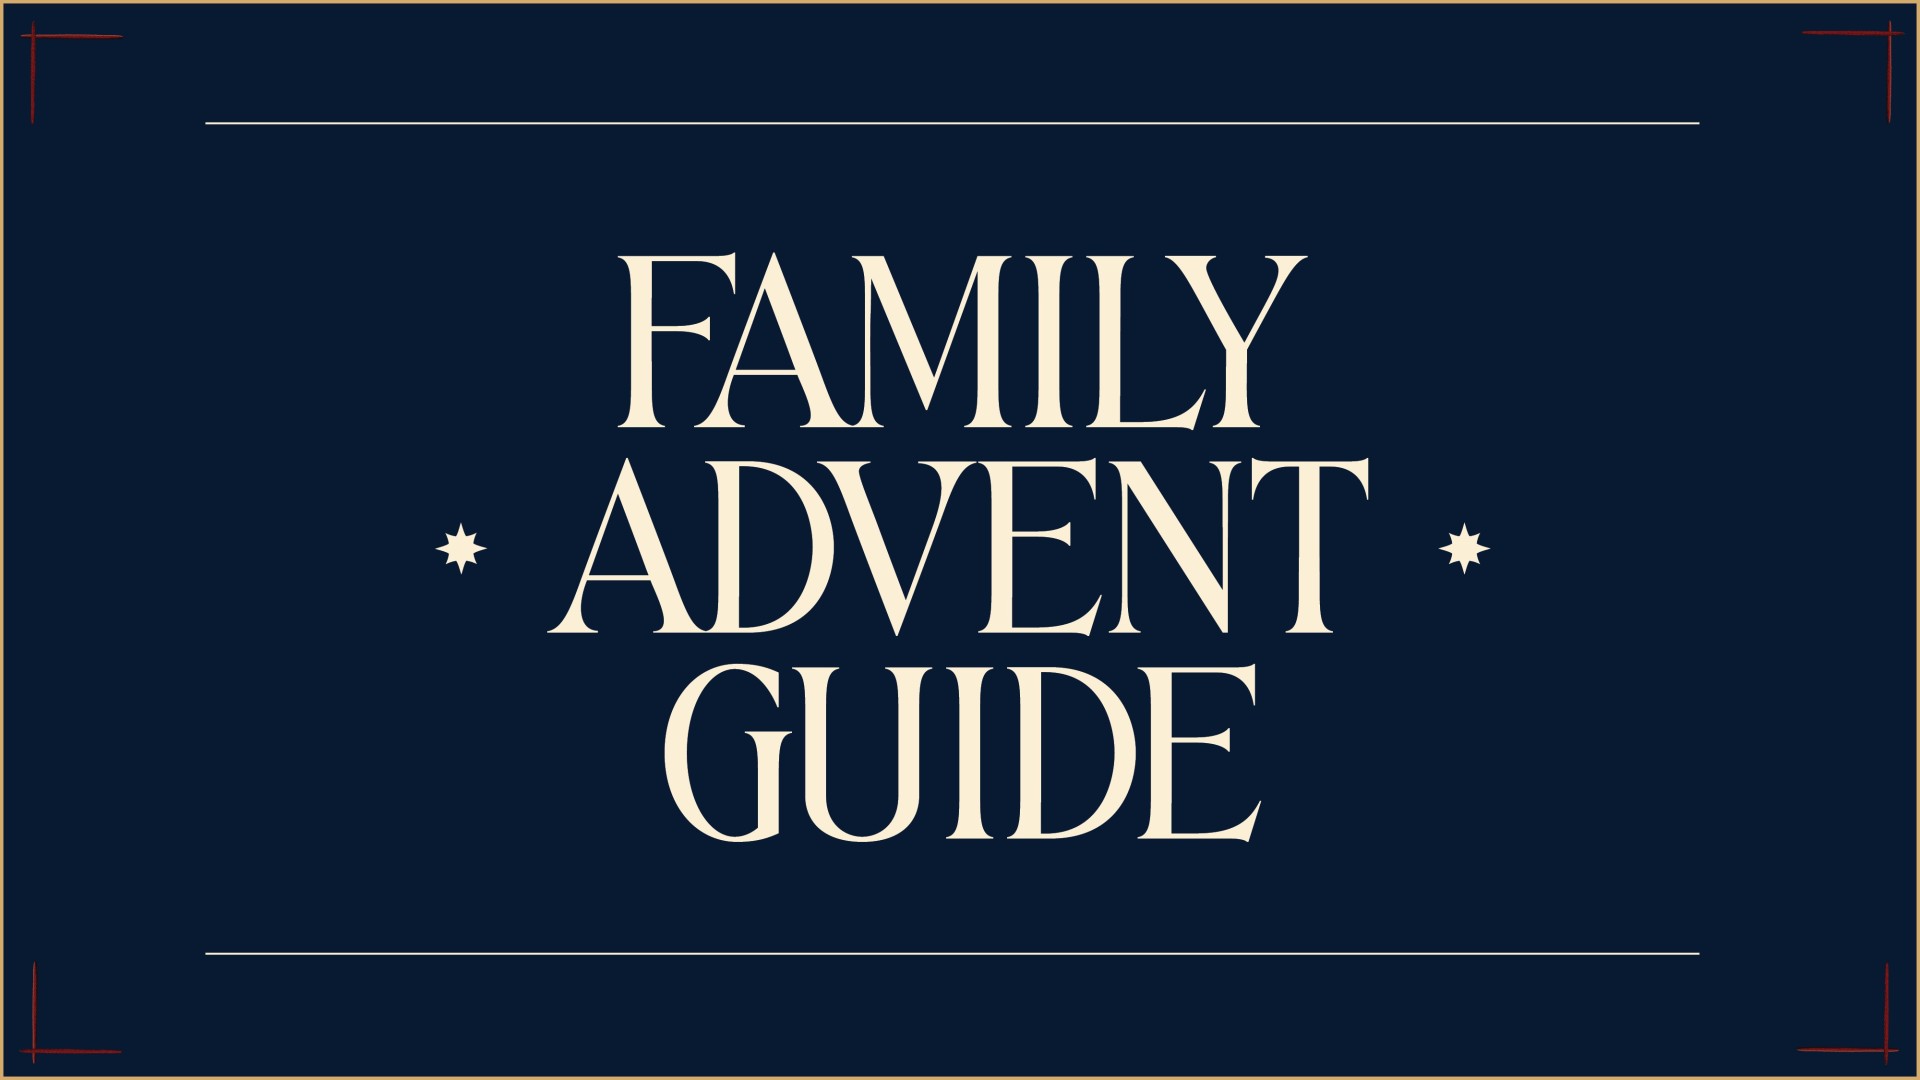 Family Advent Guide Hero Image